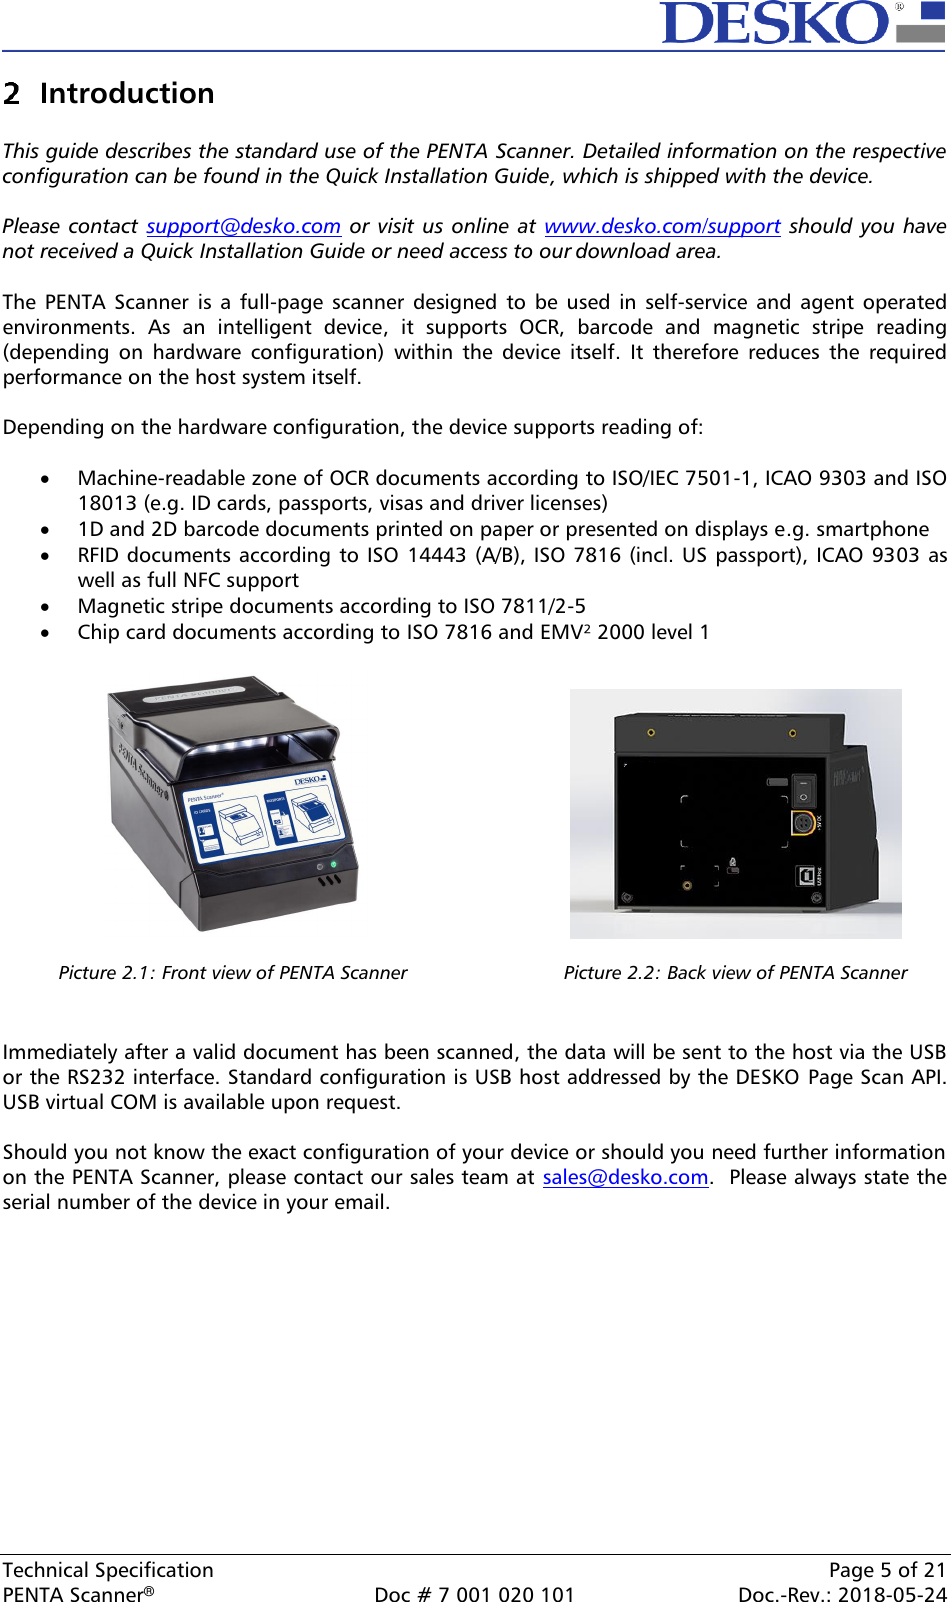  Technical Specification    Page 5 of 21 PENTA Scanner®  Doc # 7 001 020 101  Doc.-Rev.: 2018-05-24  Introduction  This guide describes the standard use of the PENTA Scanner. Detailed information on the respective configuration can be found in the Quick Installation Guide, which is shipped with the device.  Please  contact  support@desko.com or  visit us online at  www.desko.com/support should you  have not received a Quick Installation Guide or need access to our download area.  The  PENTA Scanner  is  a  full-page scanner  designed  to  be  used  in self-service  and  agent  operated environments.  As  an  intelligent  device,  it  supports  OCR,  barcode  and  magnetic  stripe  reading (depending  on  hardware  configuration)  within  the  device  itself.  It  therefore  reduces  the  required performance on the host system itself.  Depending on the hardware configuration, the device supports reading of:  • Machine-readable zone of OCR documents according to ISO/IEC 7501-1, ICAO 9303 and ISO 18013 (e.g. ID cards, passports, visas and driver licenses) • 1D and 2D barcode documents printed on paper or presented on displays e.g. smartphone • RFID documents according to ISO  14443 (A/B), ISO 7816 (incl. US passport), ICAO 9303 as well as full NFC support • Magnetic stripe documents according to ISO 7811/2-5 • Chip card documents according to ISO 7816 and EMV² 2000 level 1      Picture 2.1: Front view of PENTA Scanner   Picture 2.2: Back view of PENTA Scanner   Immediately after a valid document has been scanned, the data will be sent to the host via the USB or the RS232 interface. Standard configuration is USB host addressed by the DESKO  Page Scan API. USB virtual COM is available upon request.  Should you not know the exact configuration of your device or should you need further information on the PENTA Scanner, please contact our sales team at sales@desko.com.  Please always state the serial number of the device in your email.  